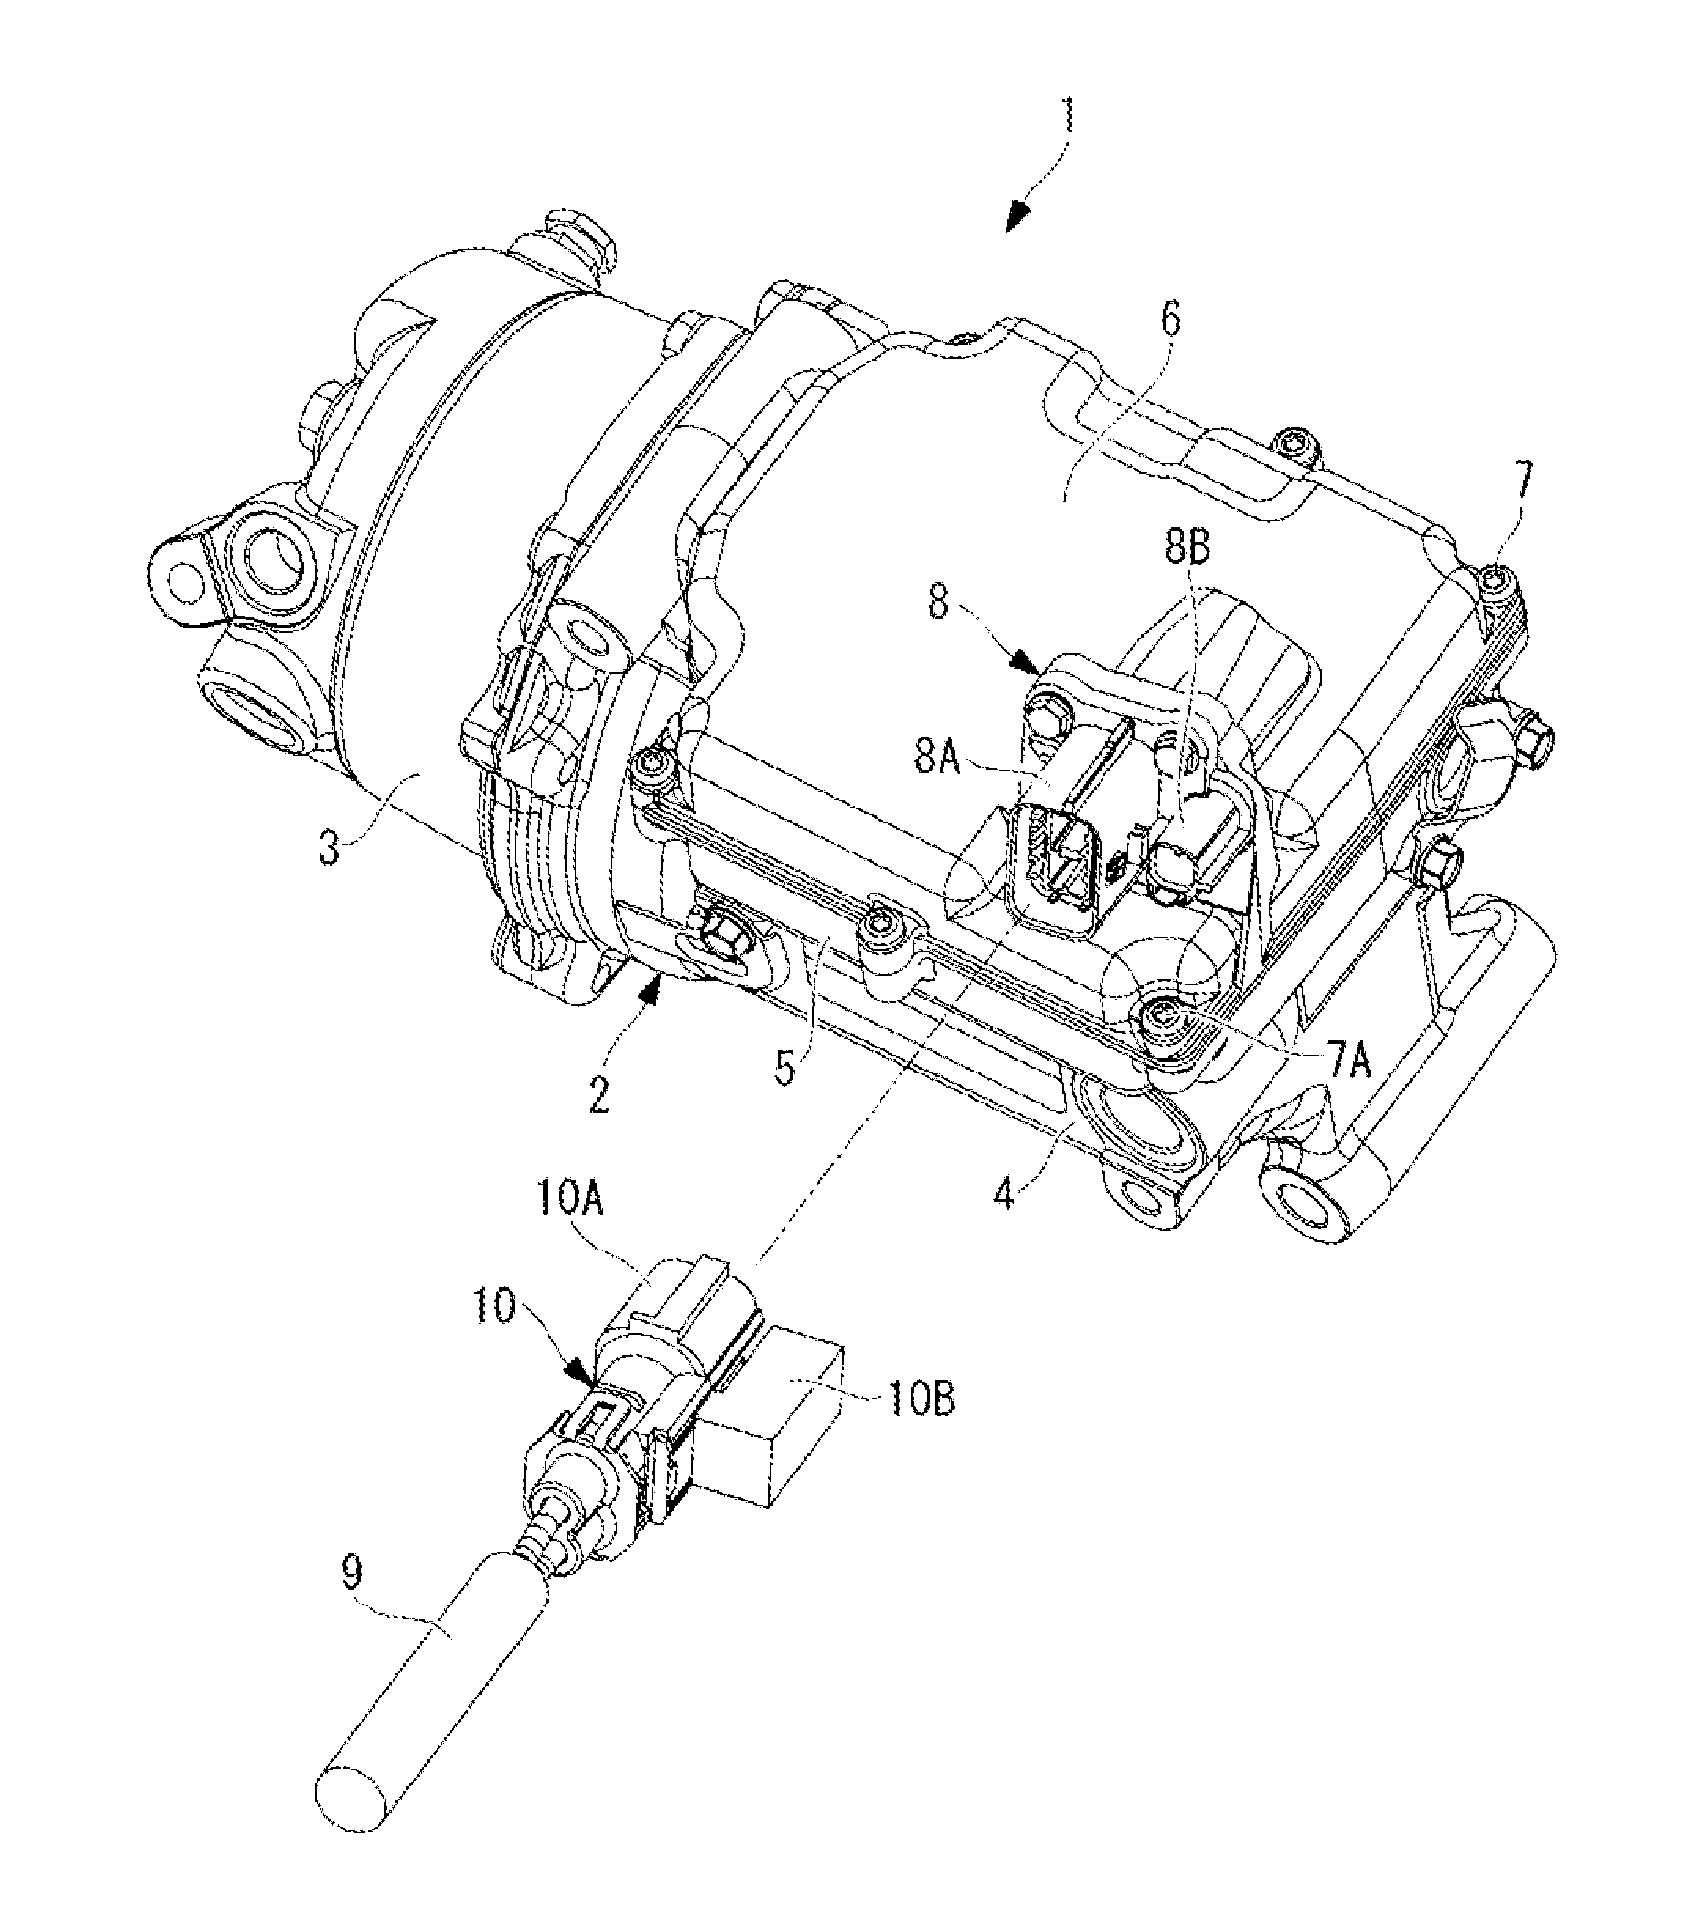 Inverter-integrated electrically driven compressor